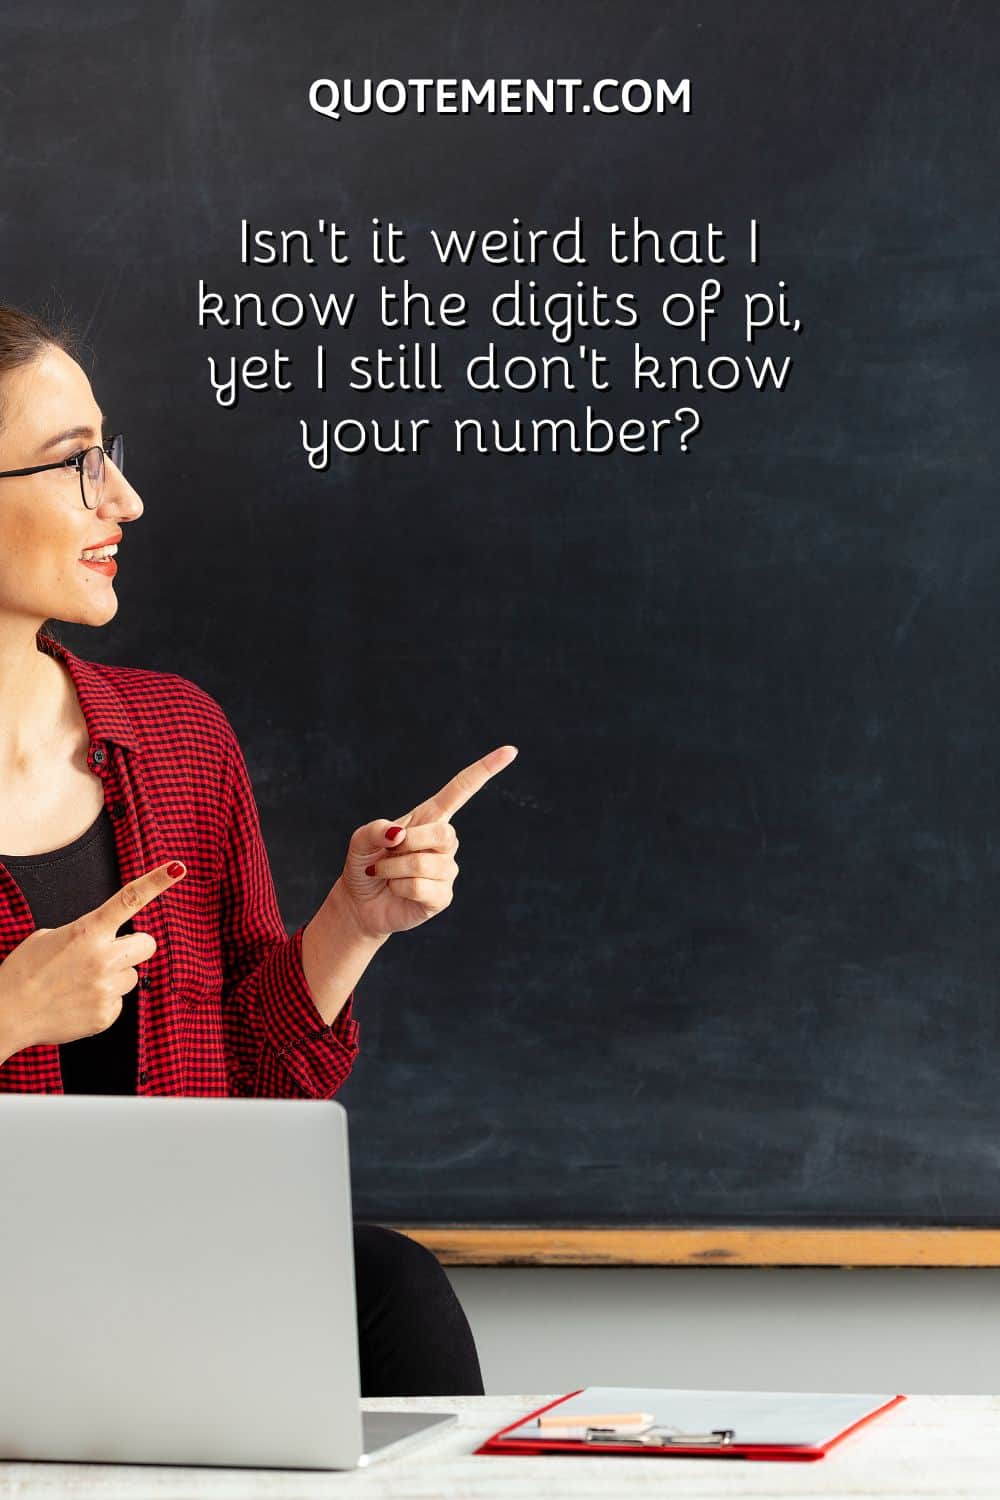 Isn’t it weird that I know the digits of pi, yet I still don’t know your number